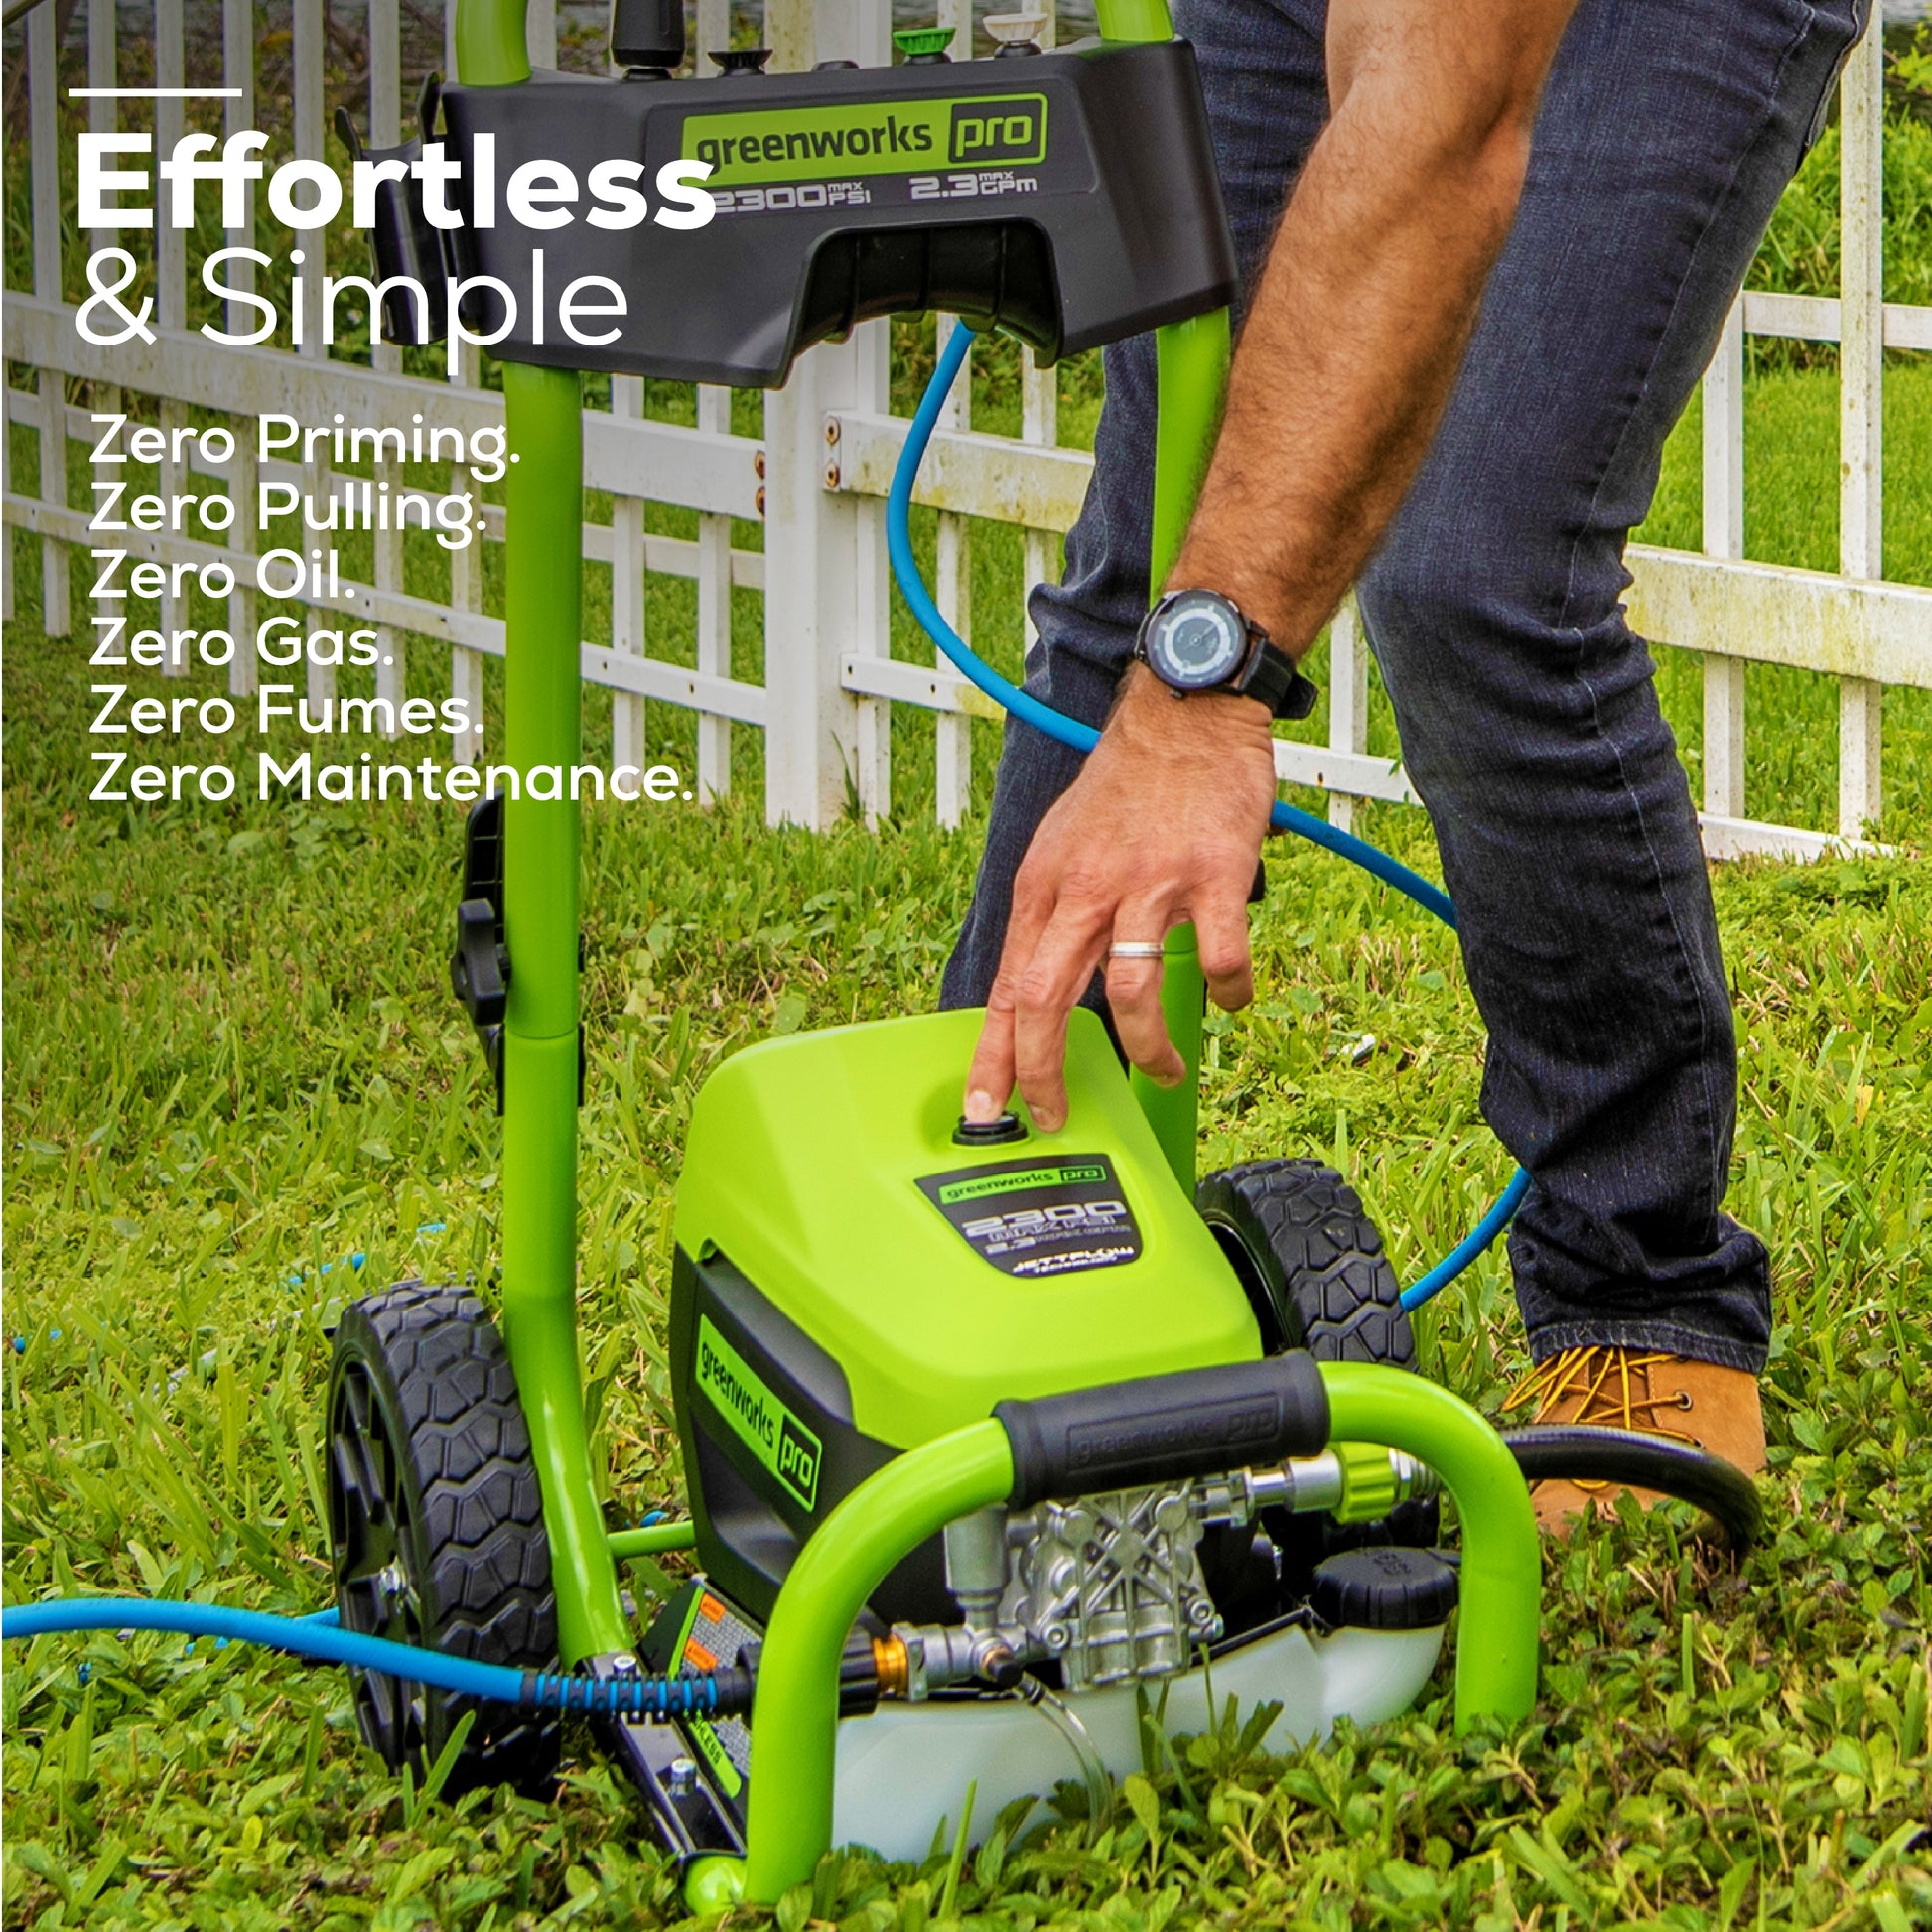 Greenworks Electric Pressure Washer up to 1900 PSI at 1.2 GPM